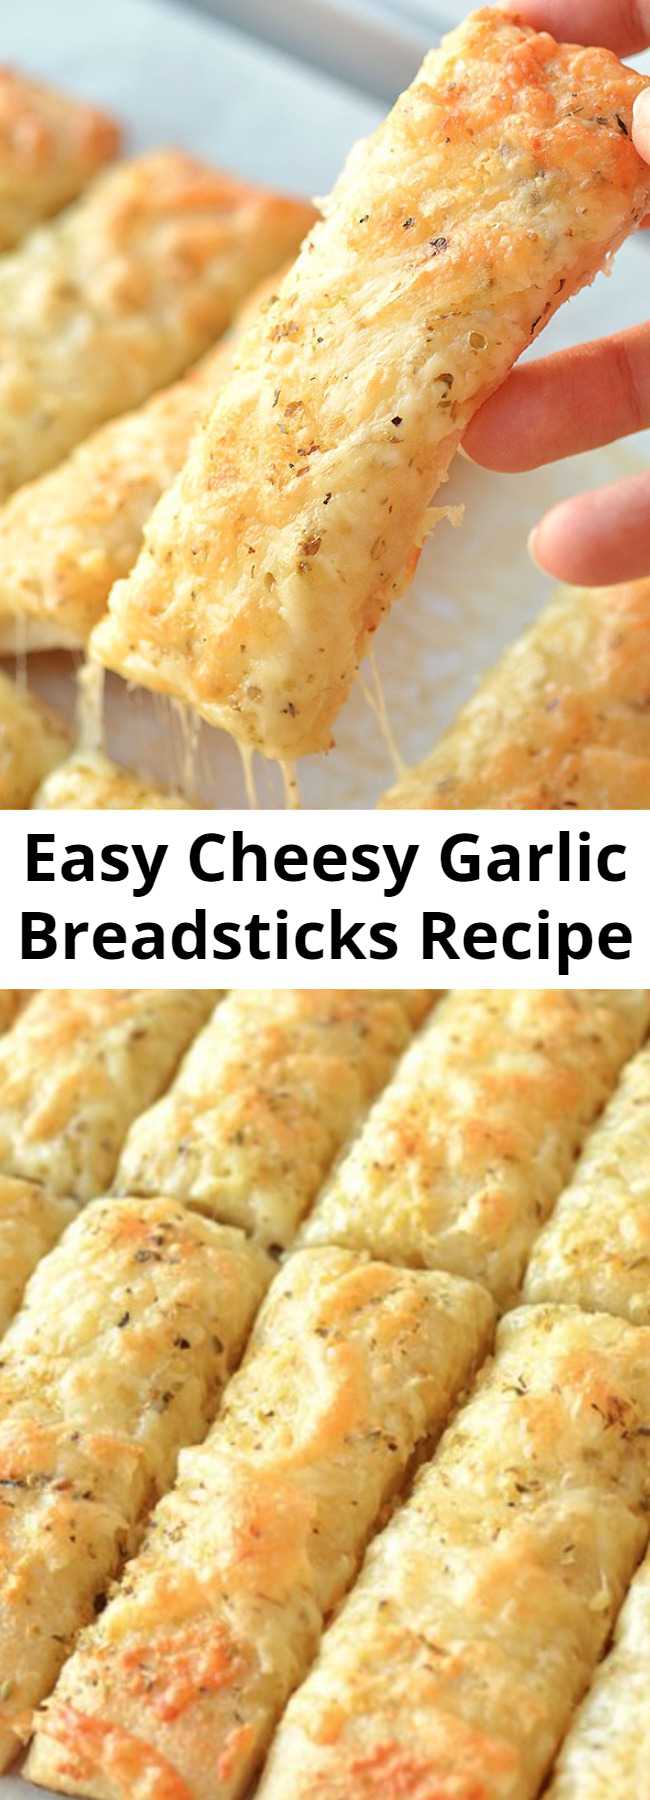 Easy Cheesy Garlic Breadsticks Recipe - These cheesy garlic breadsticks are so easy to make and they taste SO GOOD! This is such an easy, awesome and super delicious side dish recipe that uses Pillsbury refrigerated pizza crust. They take less than 20 minutes from start to finish and go really well with your favorite soups and salads.